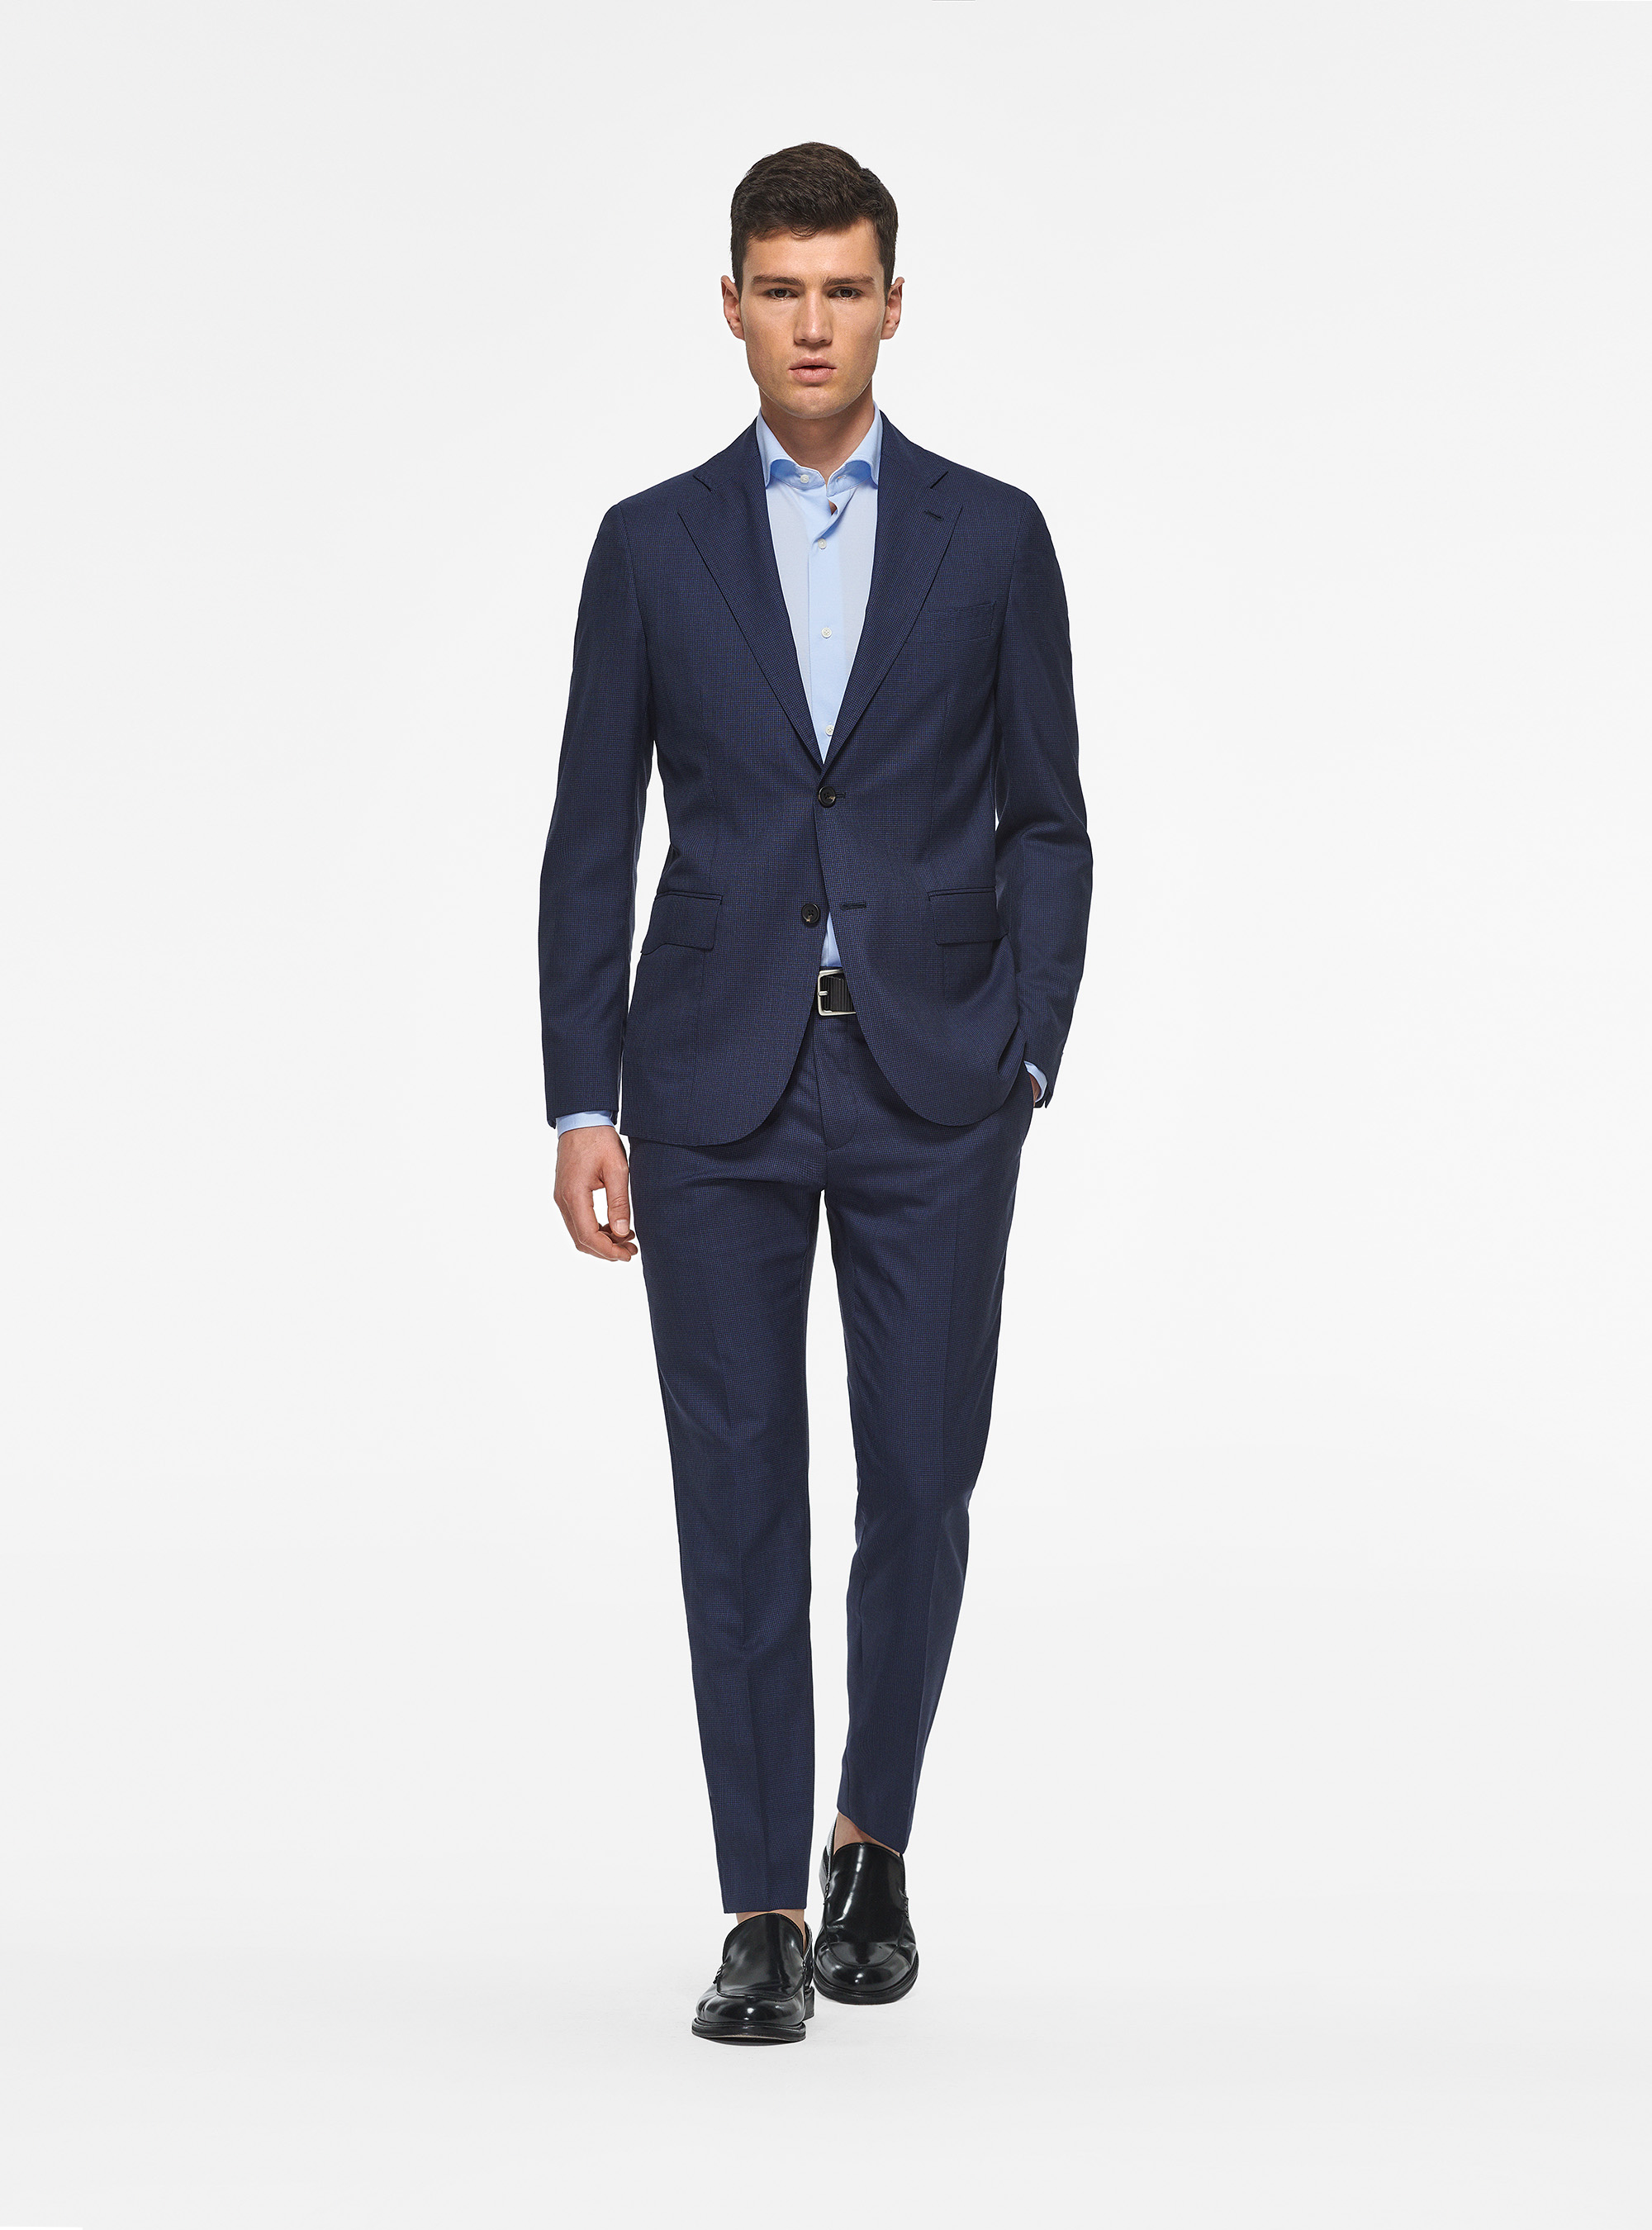 Houndstooth suit in navy blue wool